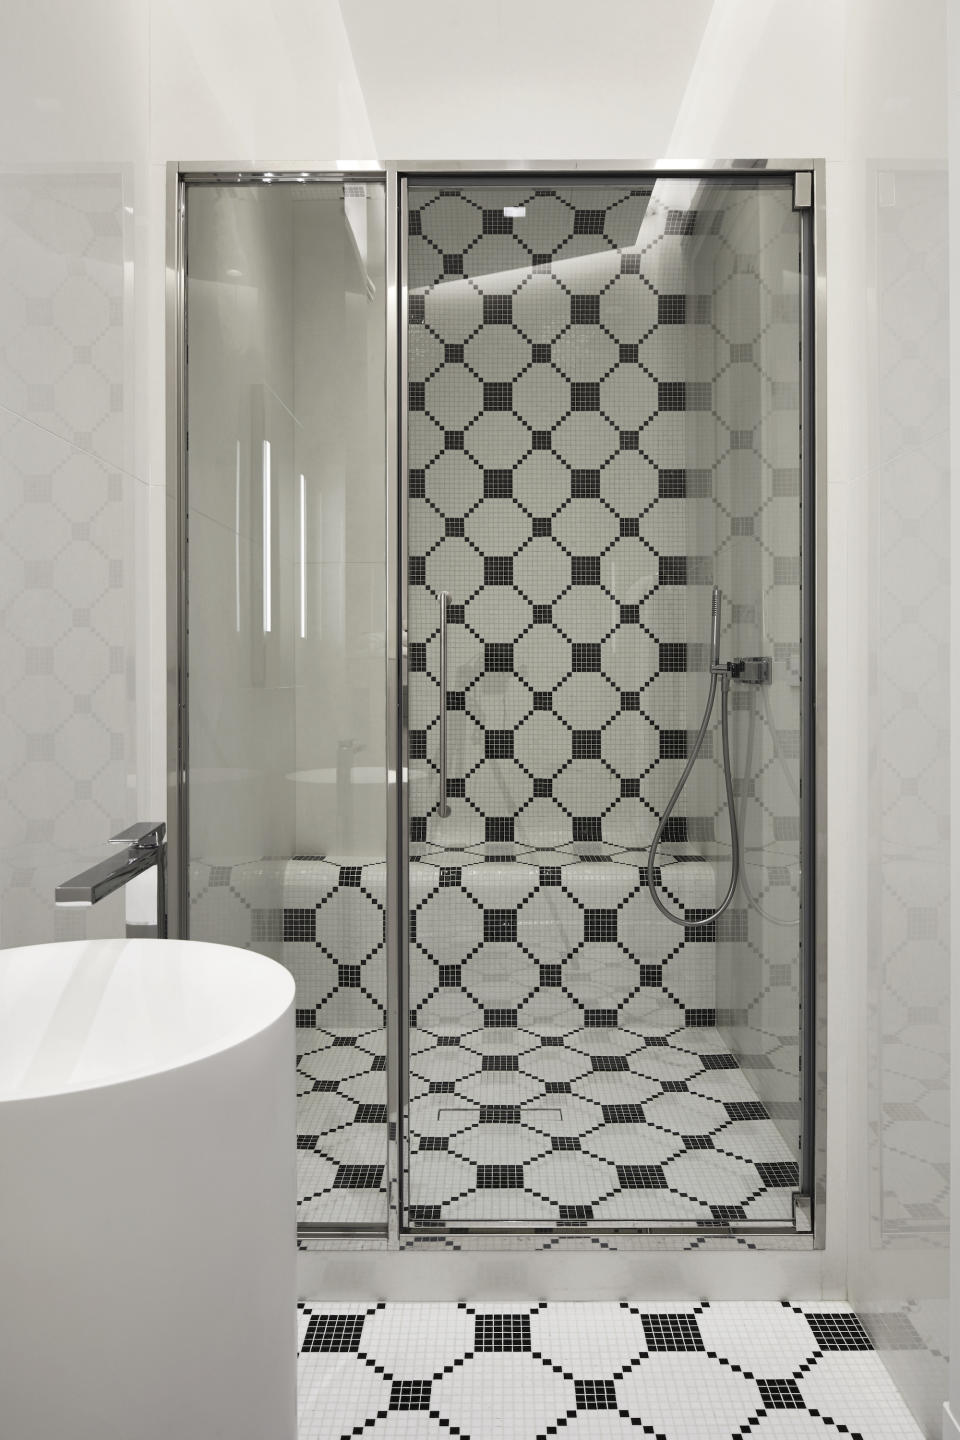 <p> Mosaics allow you to create flexible shower tile ideas, and are especially useful for creating shower bench ideas that are both practical and free of sharp edges.&#xA0; </p> <p> &apos;There is a real trend for installing shower benches in cubicles and wet rooms now,&apos; says <em>H&amp;G</em> Editor in Chief Lucy Searle. &apos;Largely inspired by the need for creating spa bathrooms at home post-pandemic, they can be tiled to create an eye-catching feature.&apos; </p>